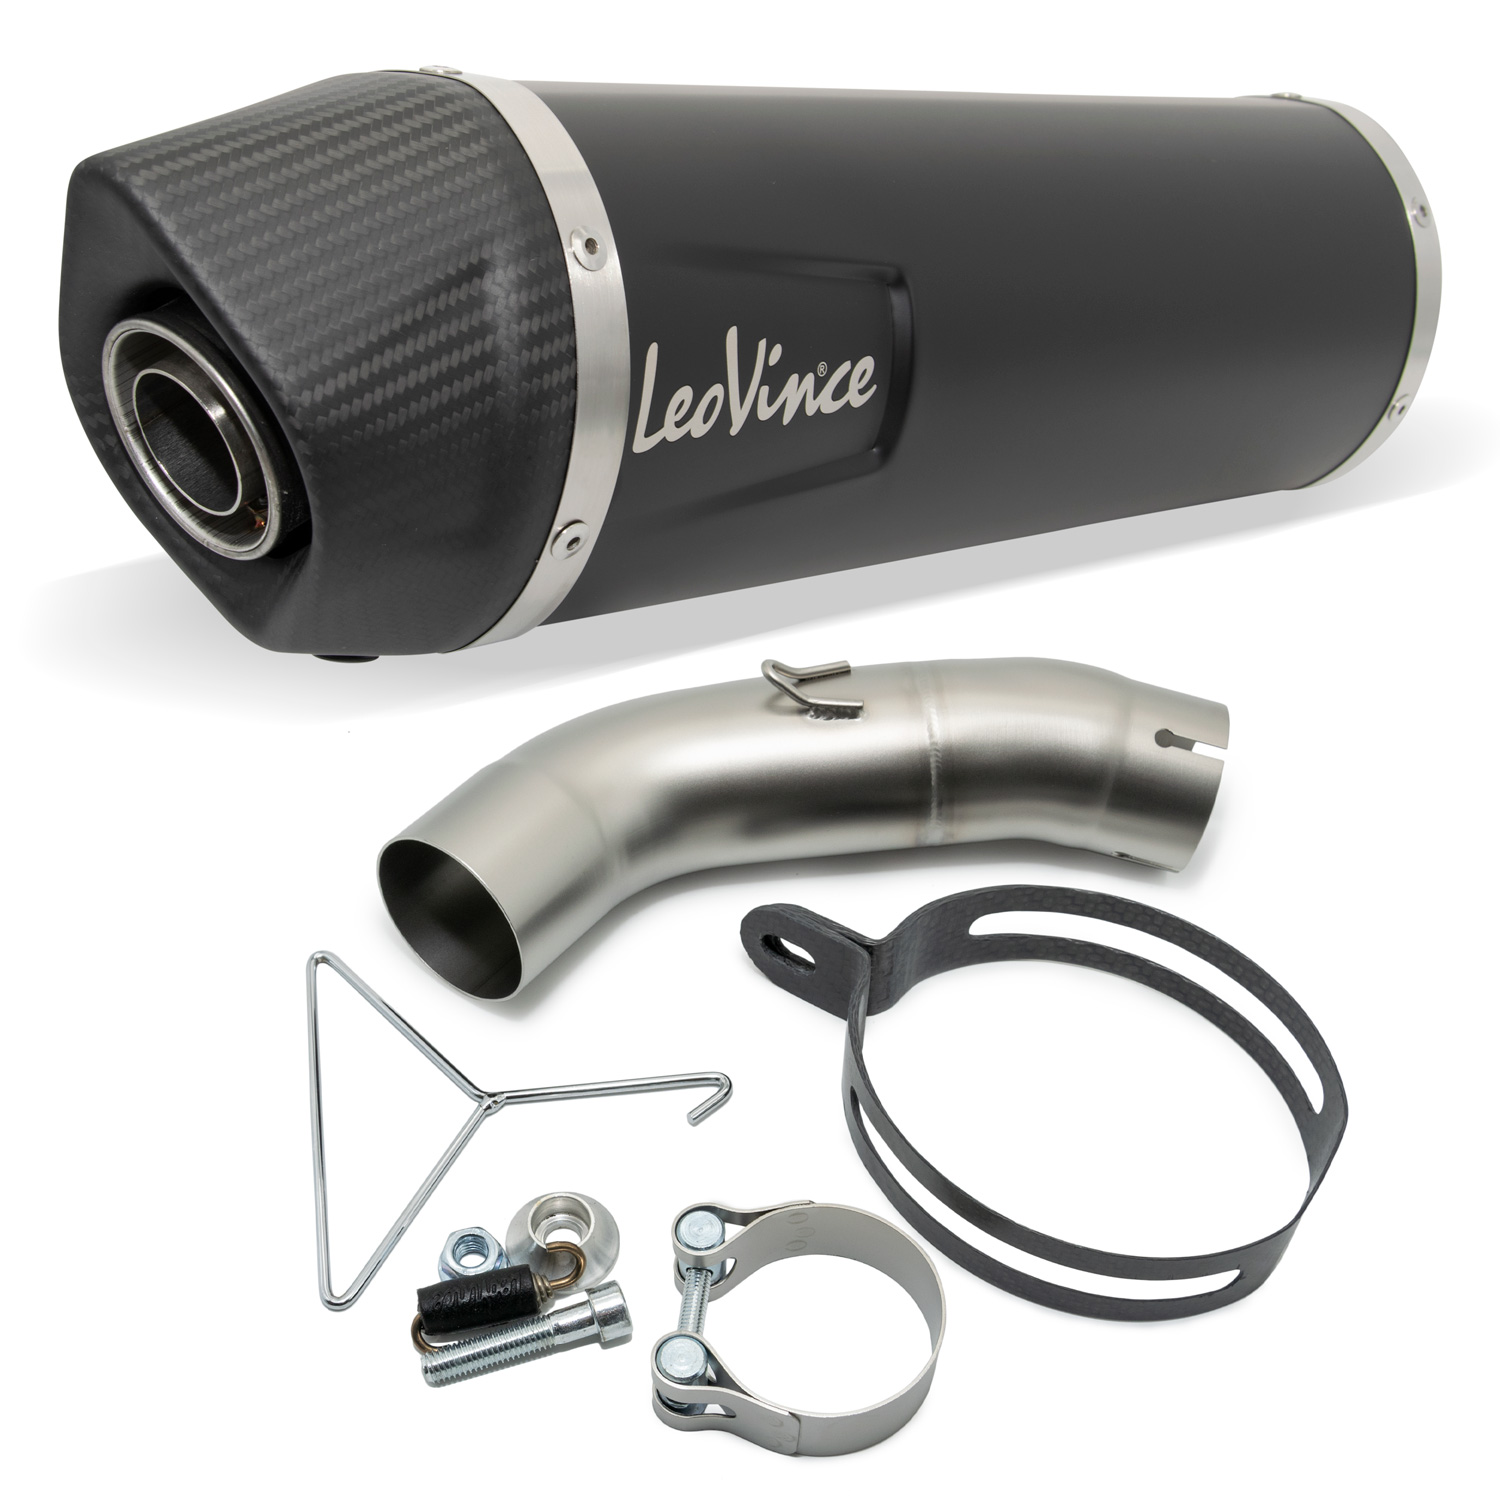 DB Killer LeoVince exhaust silencer SBK for LV-10  Heavy Tuned: Cheap  spareparts for Scooter, Bikes, Motorcycles & Vespa